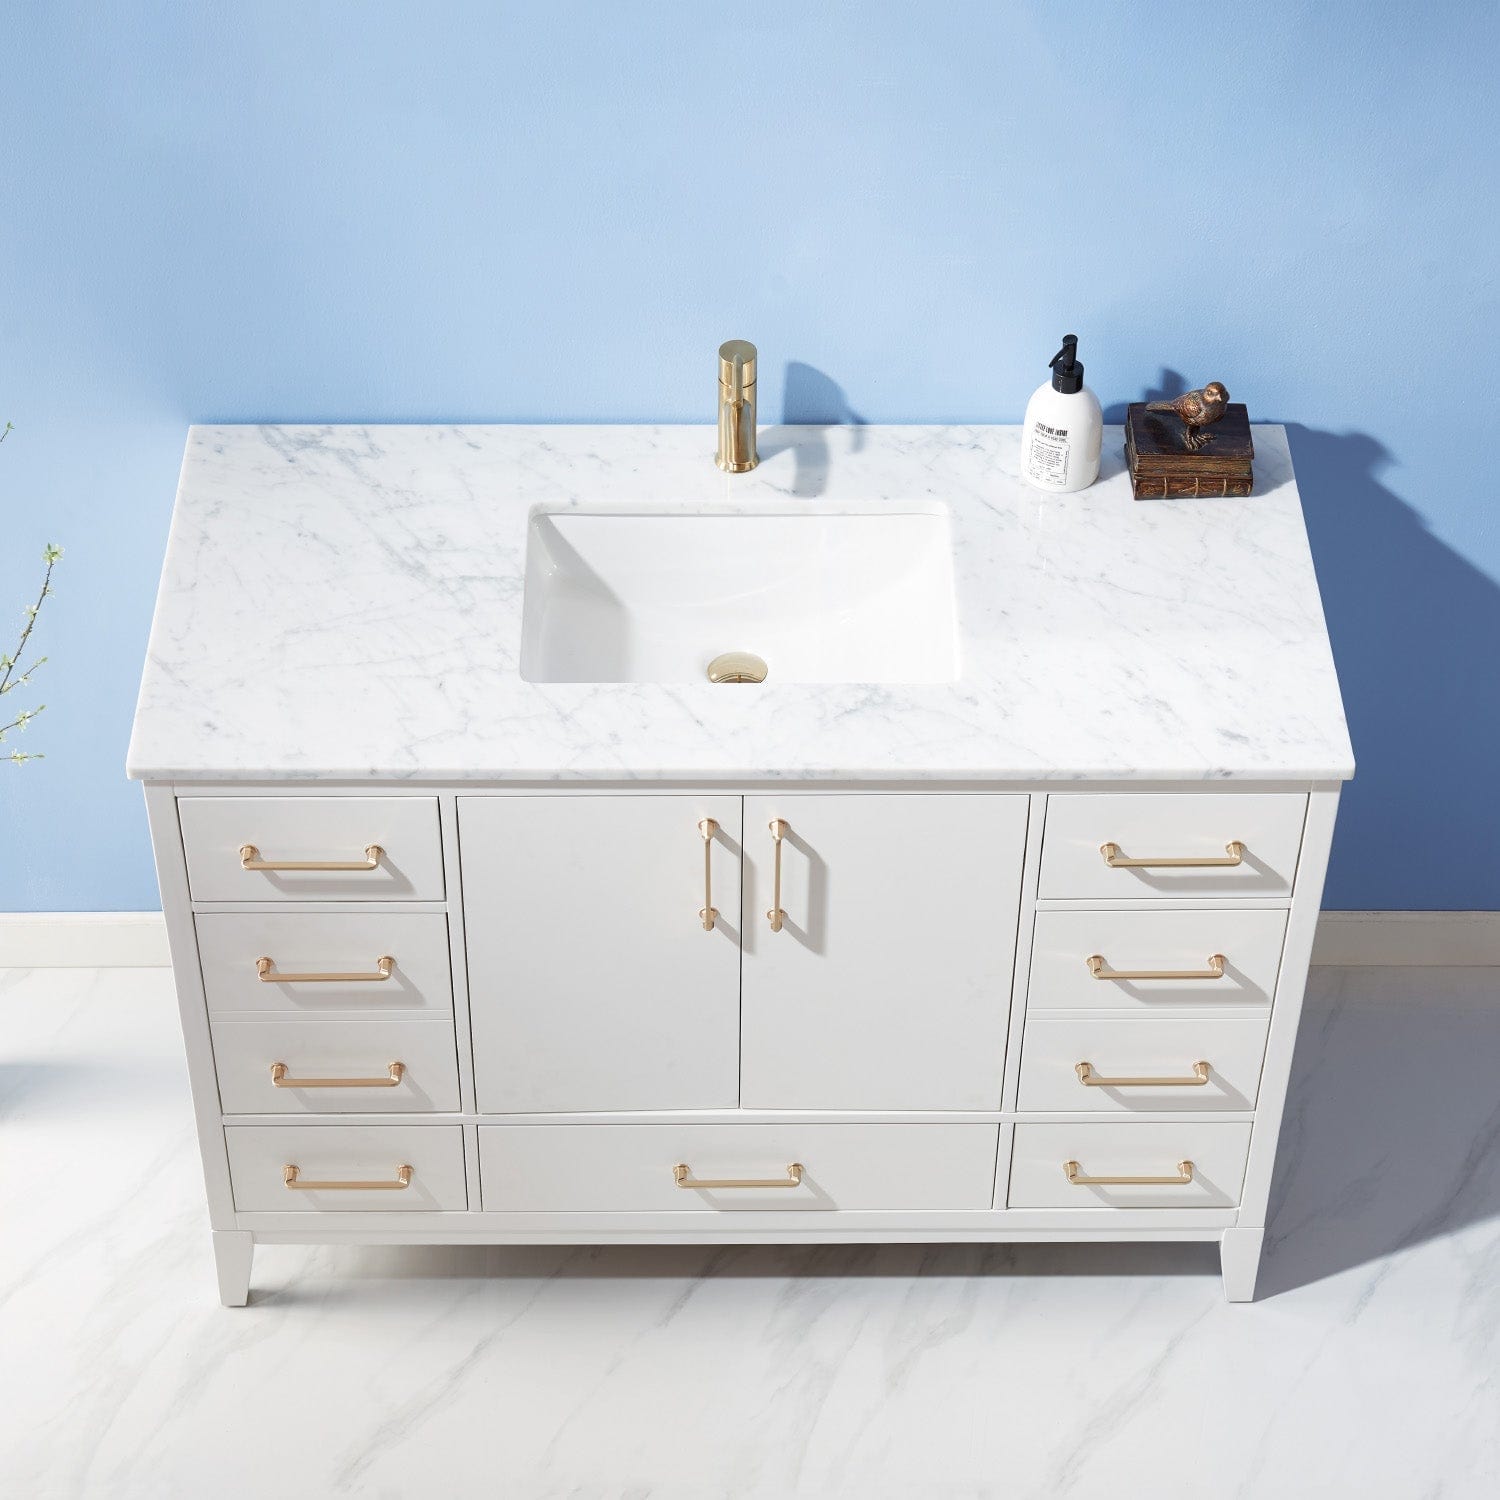 Altair Sutton 48" Single Bathroom Vanity Set in White and Carrara White Marble Countertop without Mirror 541048-WH-CA-NM - Molaix631112971928Vanity541048-WH-CA-NM